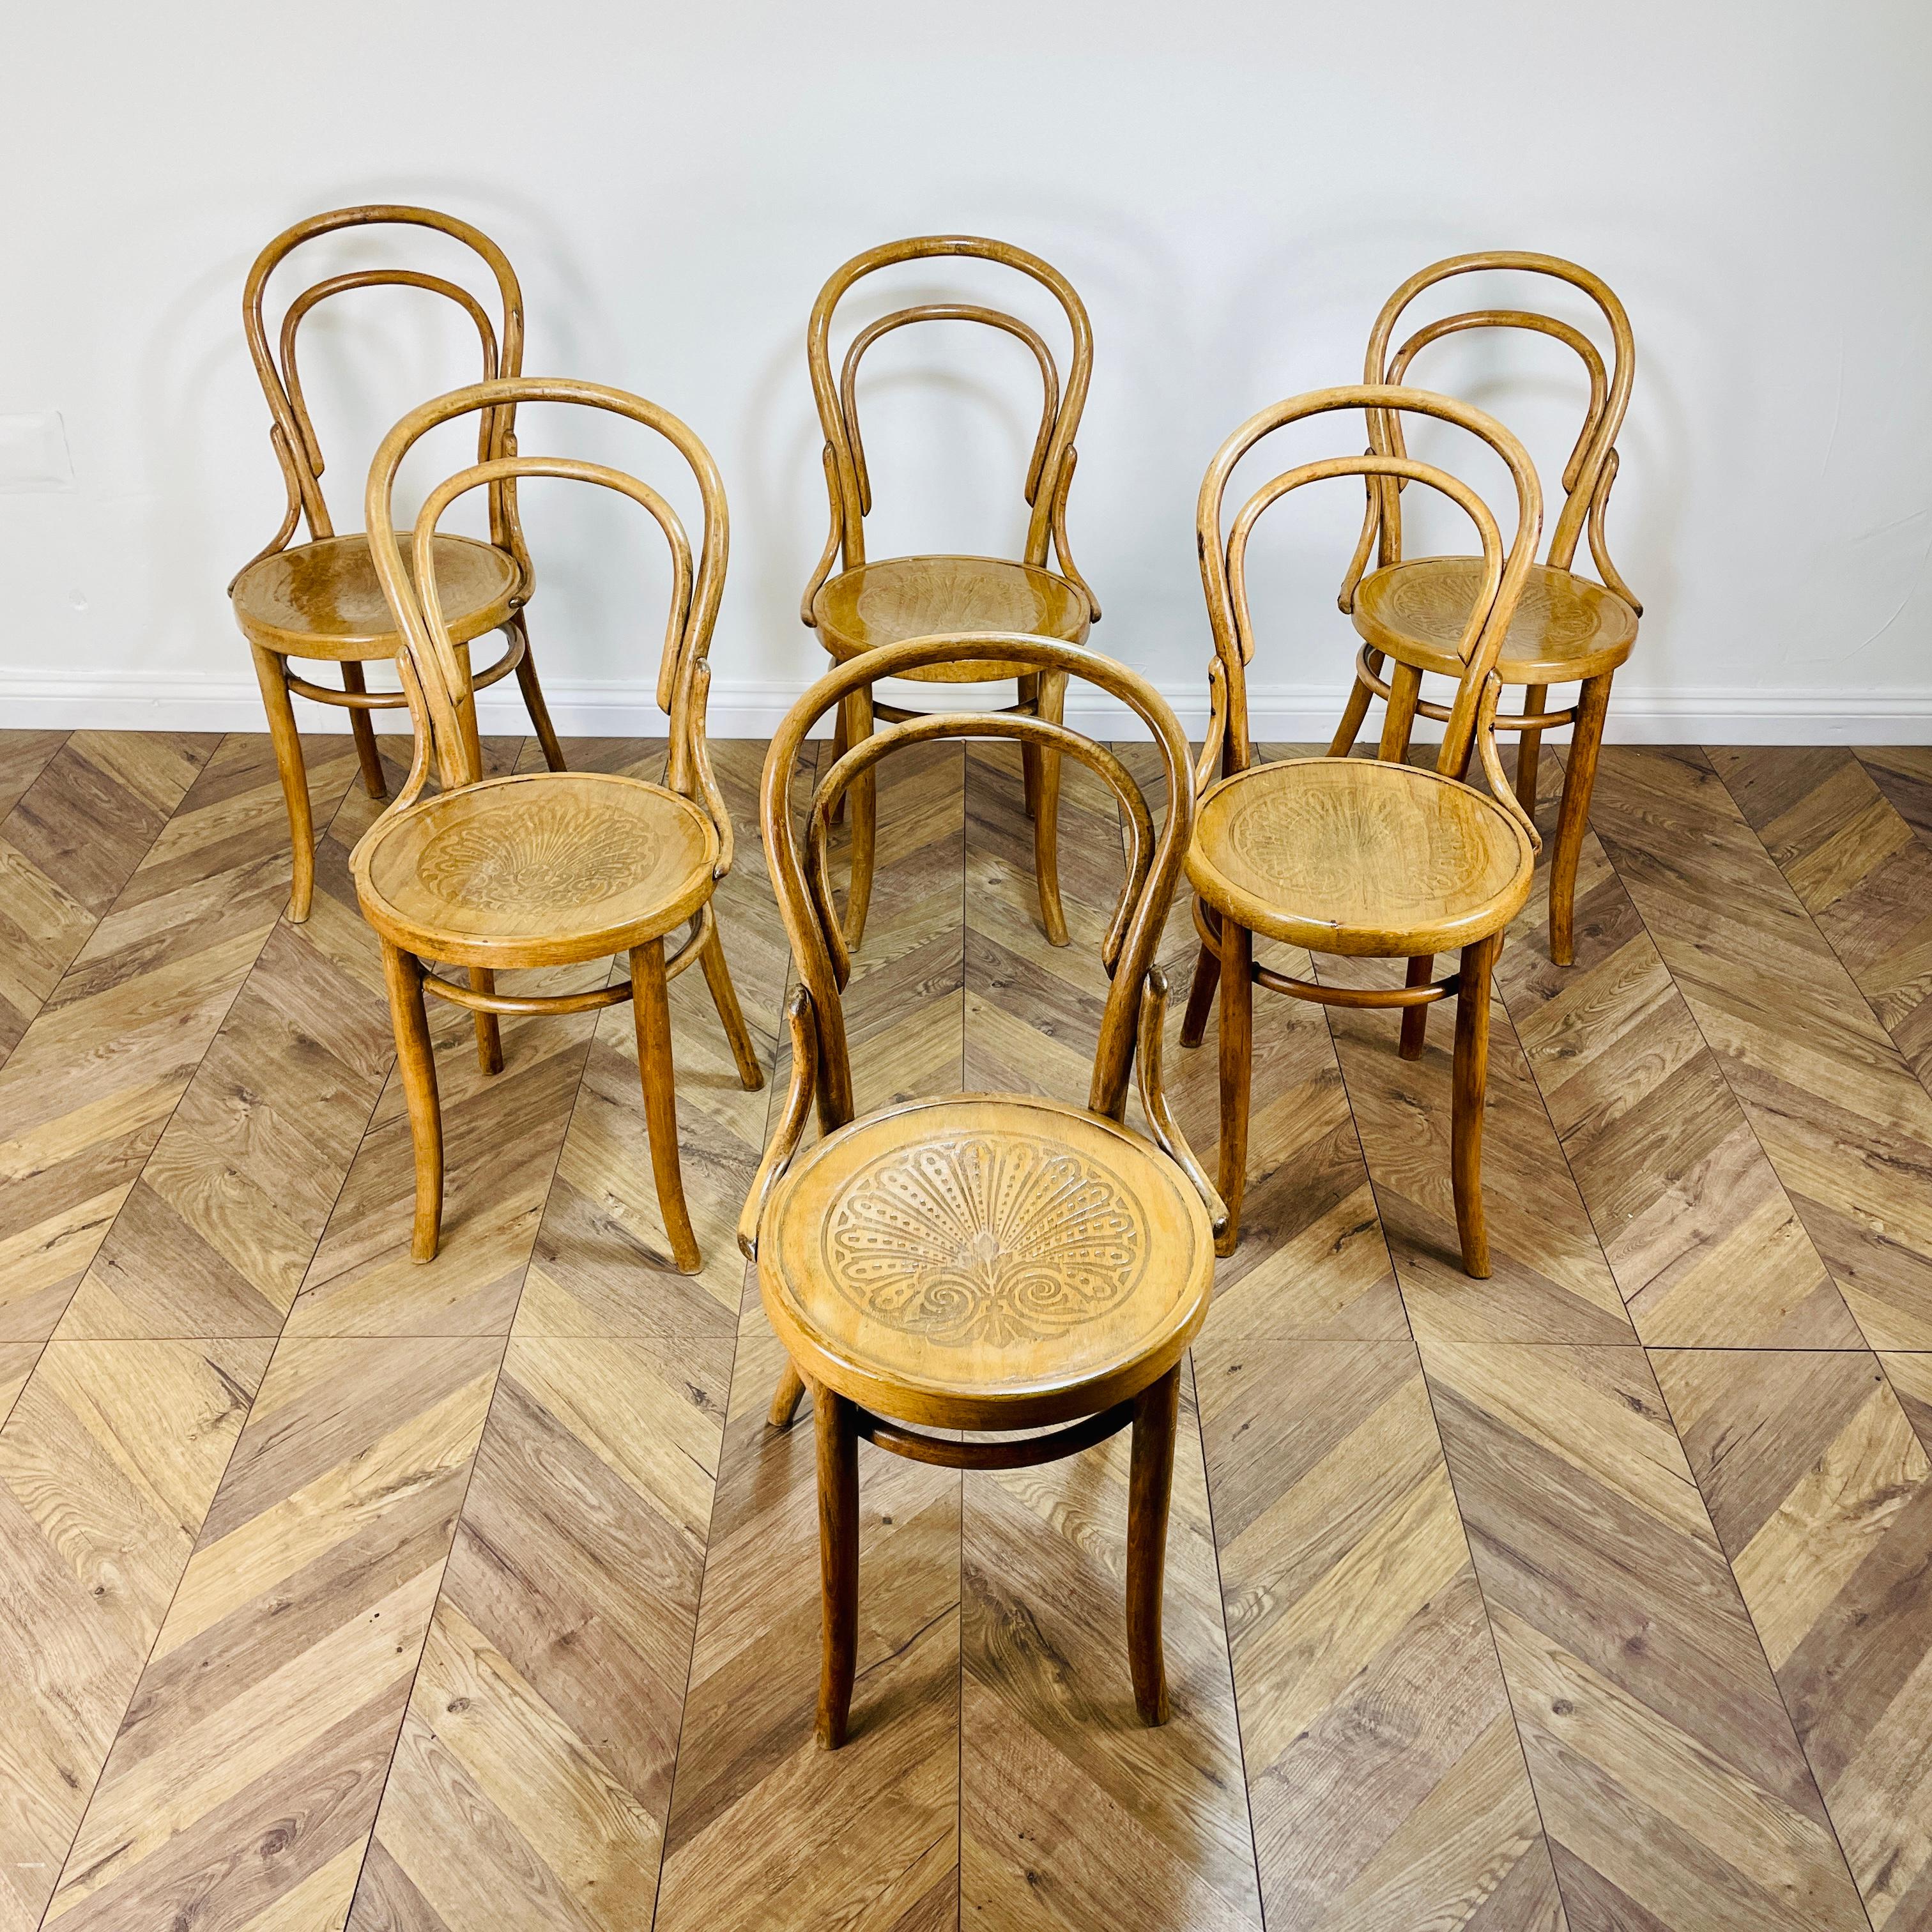 A Set of 6, midcentury Bentwood Cafe / Bistro Chairs, Set of 6, circa 1930s.

Made in Poland by CLC in the Thonet style, the chairs are in great condition, and boast a lovely warm patina.

The chairs do have minor scuffs and marks to the